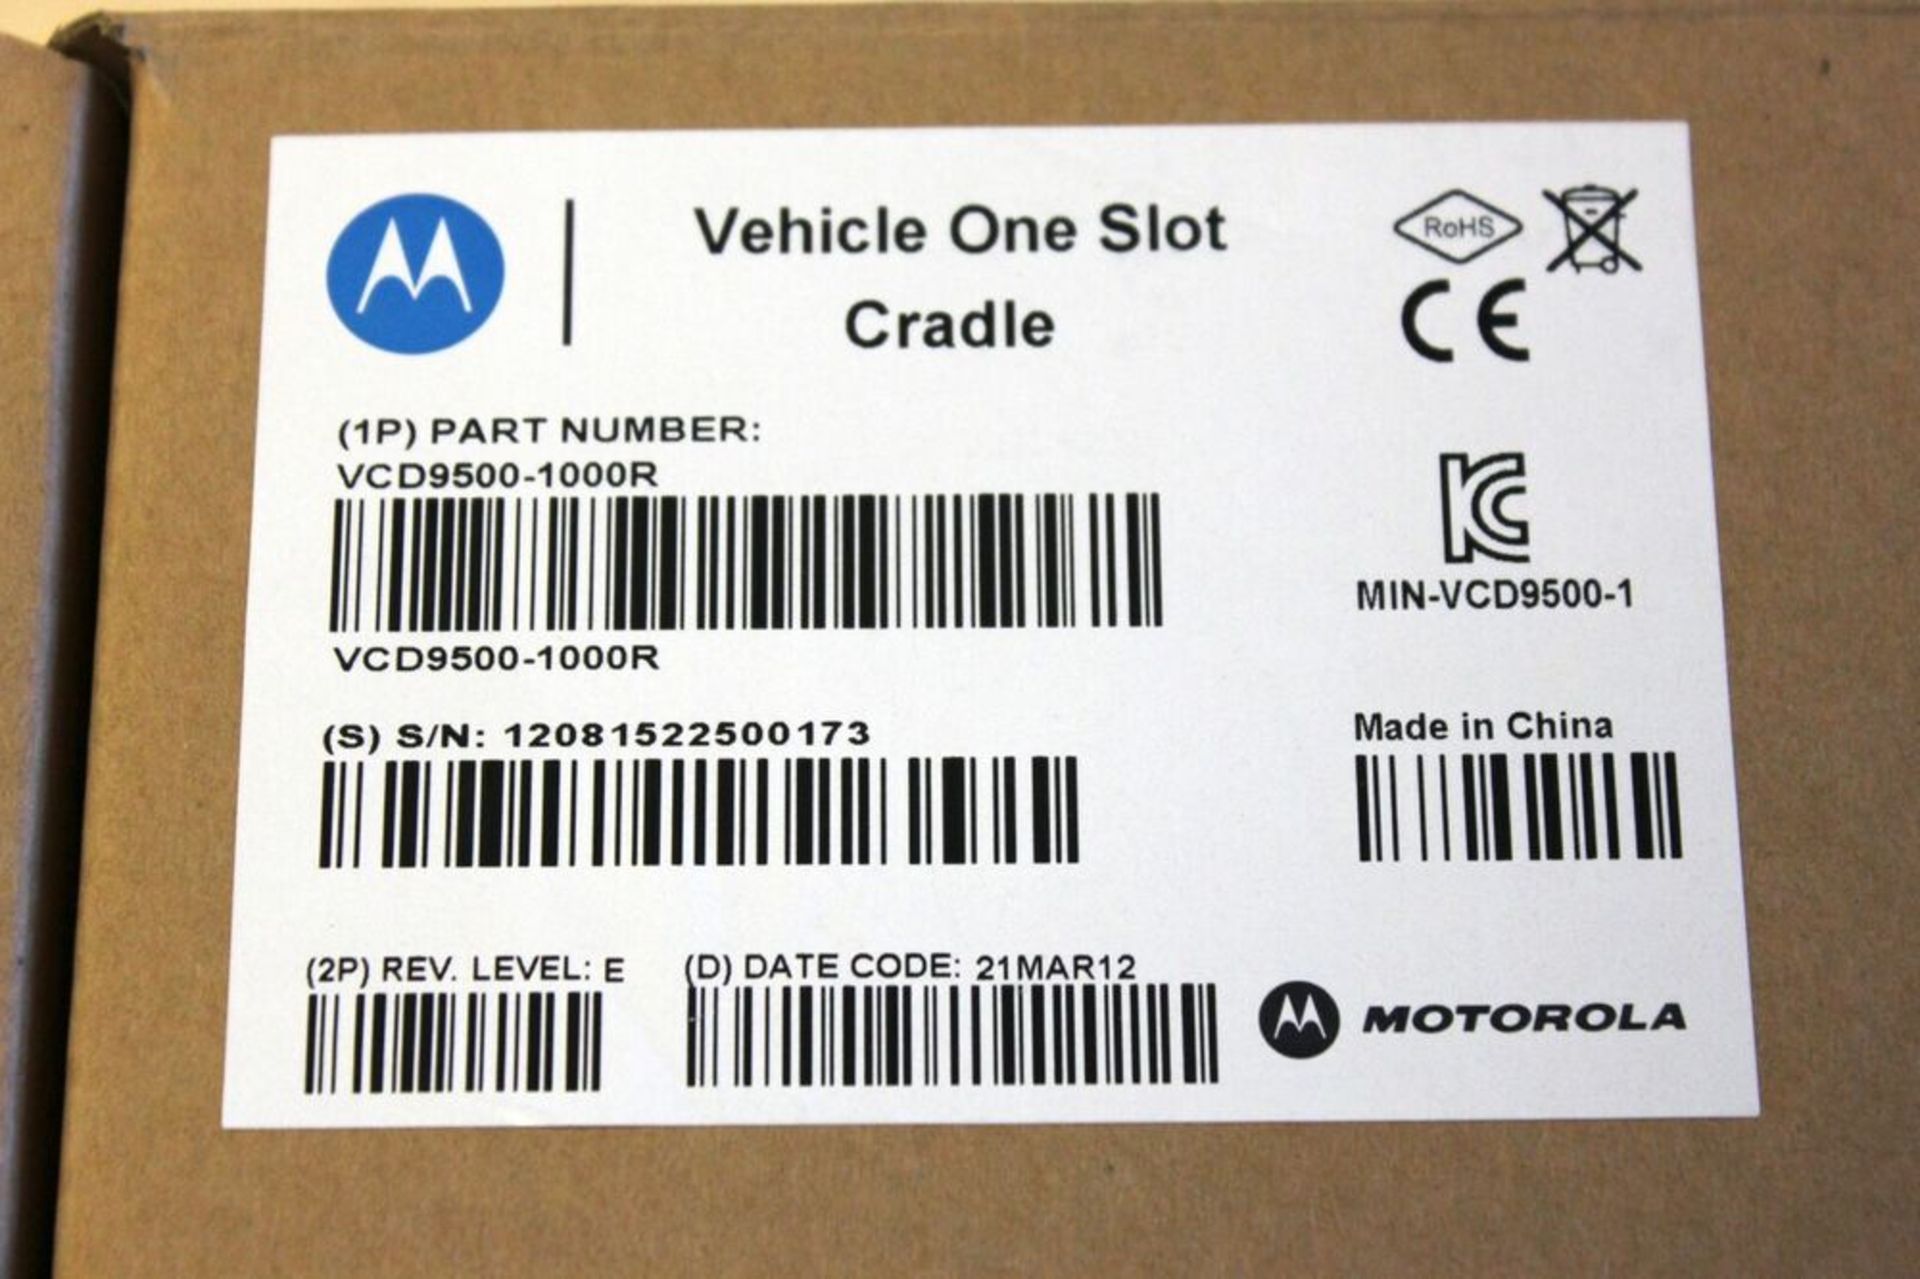 New Motorola VCD9500-1000R Vehicle One Slot Cradle for MC9500 with Accessories - Image 3 of 4